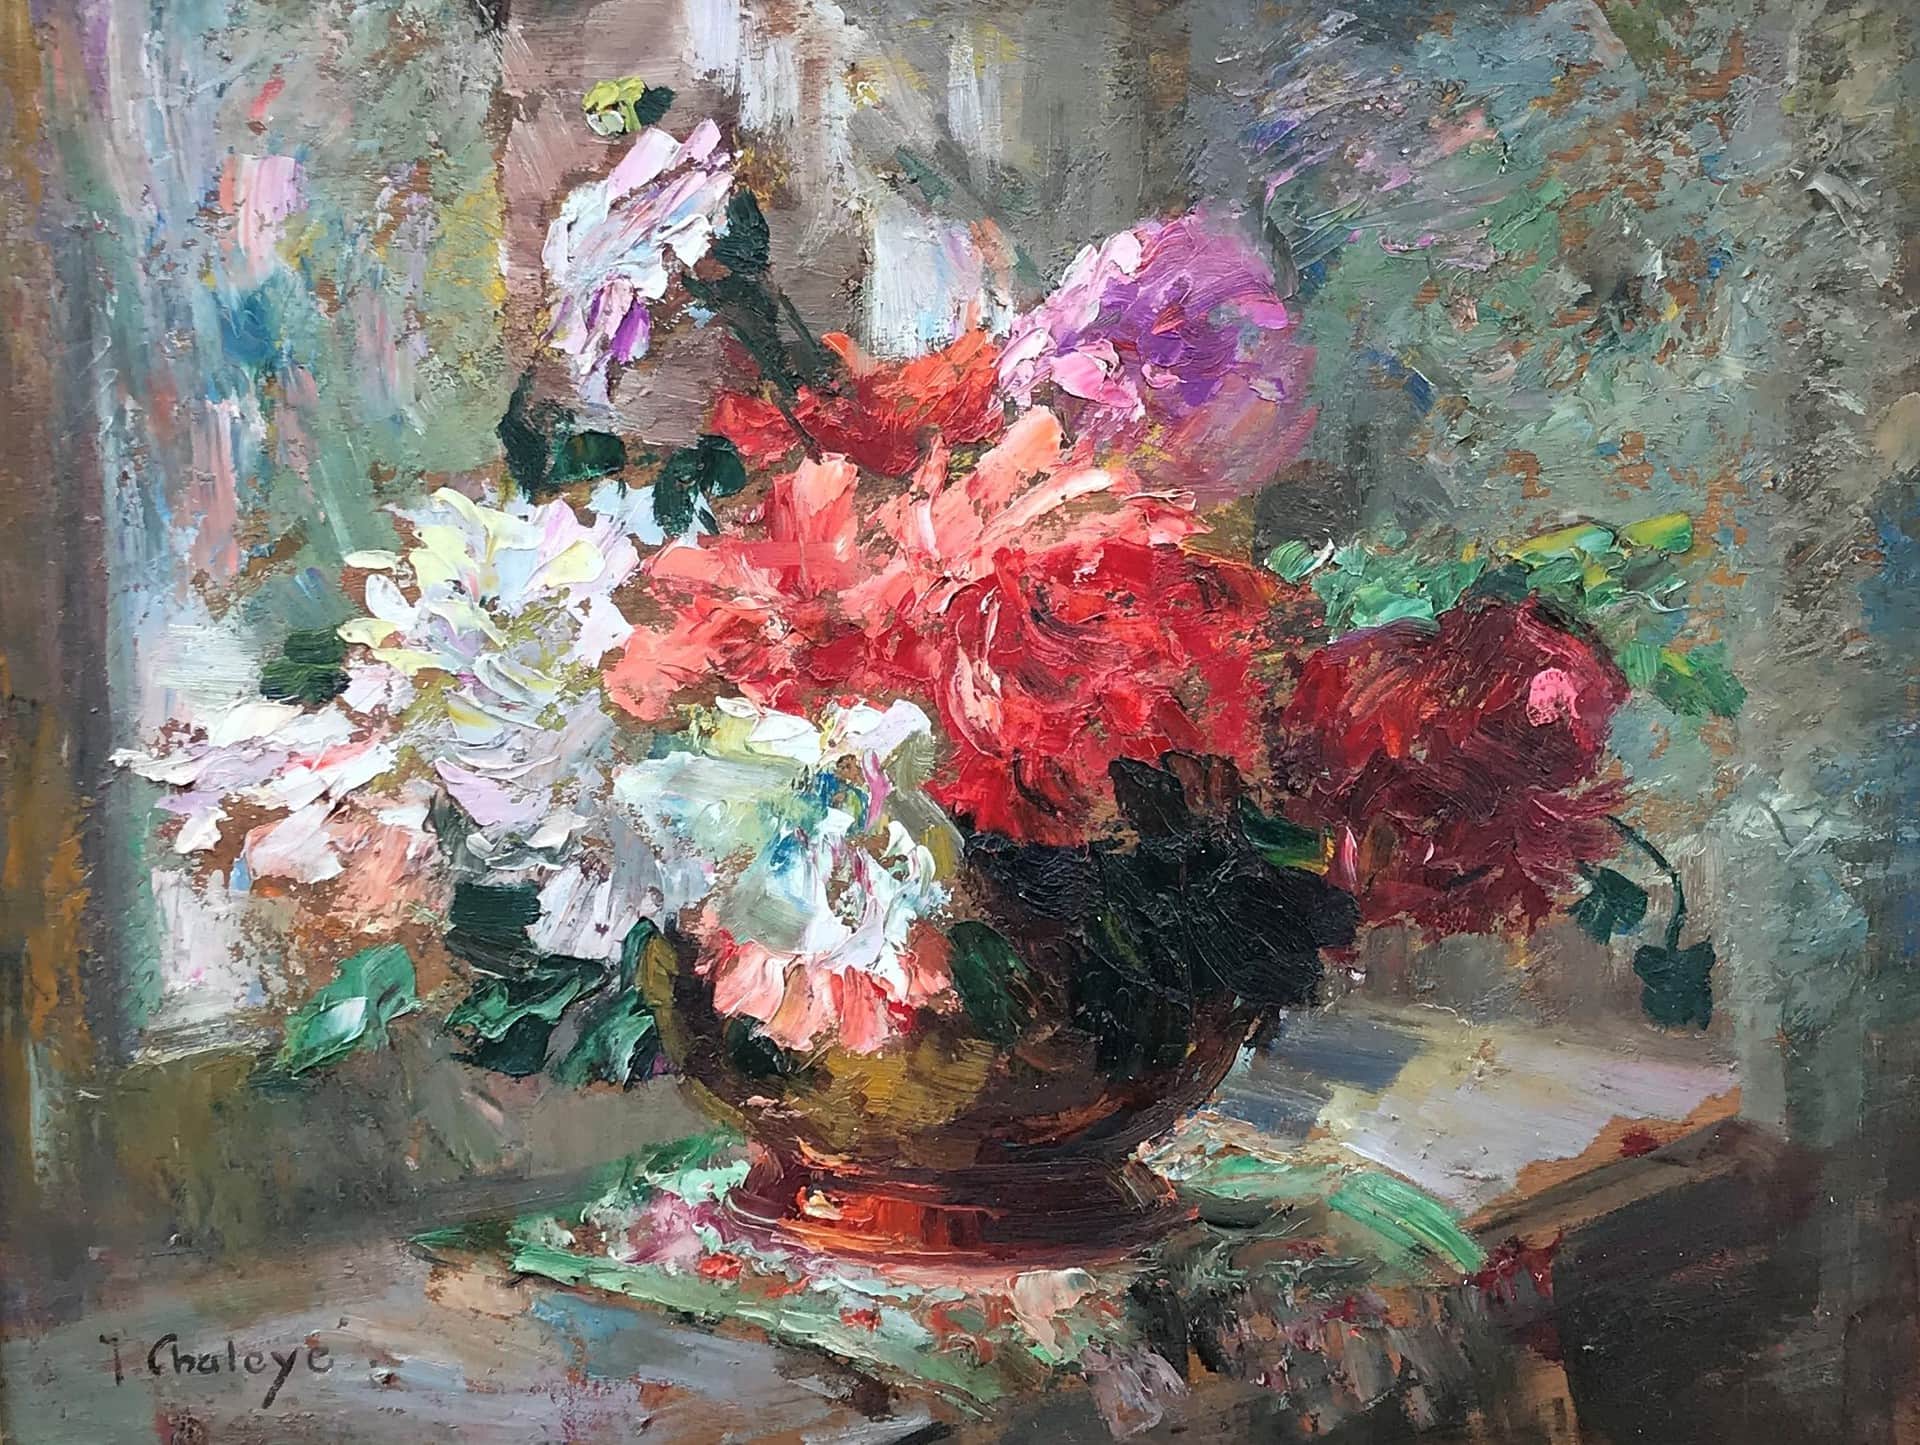 Jean Chaleye's Still life of Flowers. A bouquet of white, red, and purple flowers done in strong though indistinct brushwork.